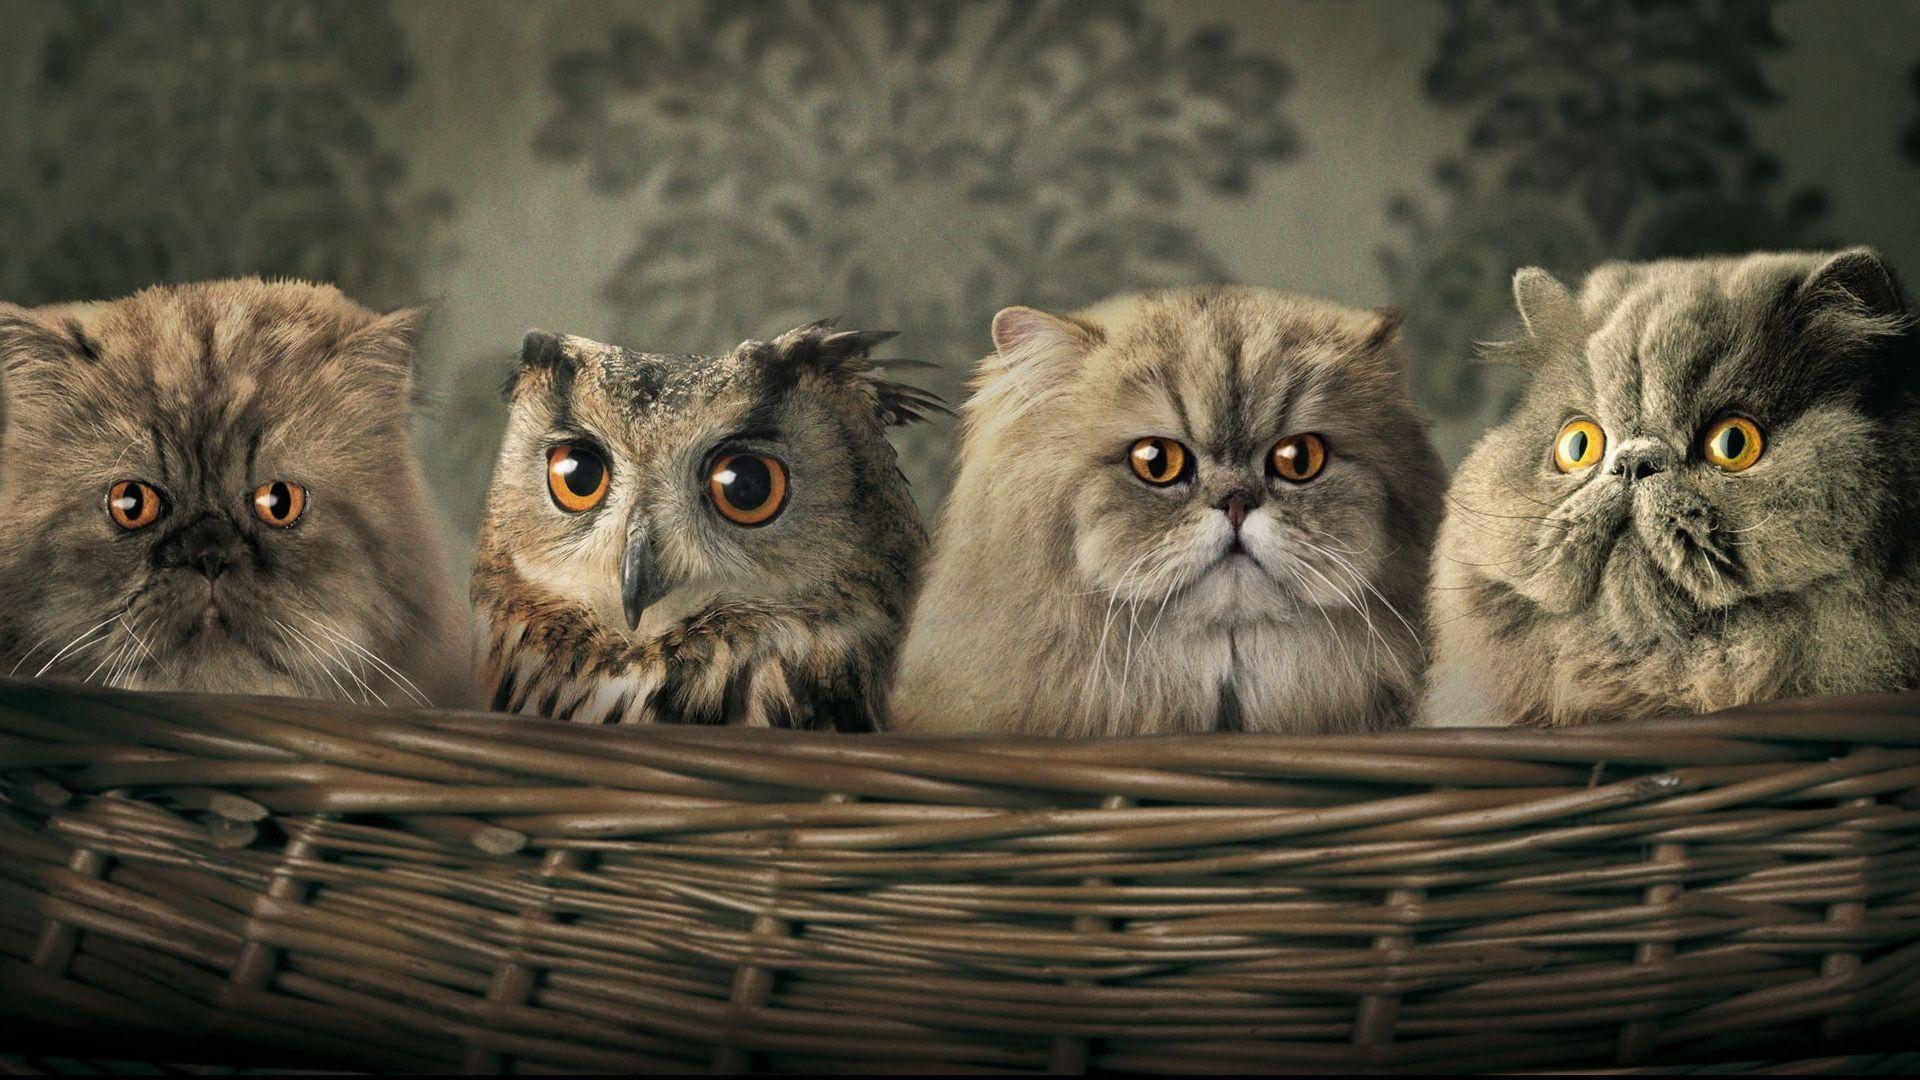 Funny Animal Mix Ina Basket. HD Animals and Birds Wallpaper